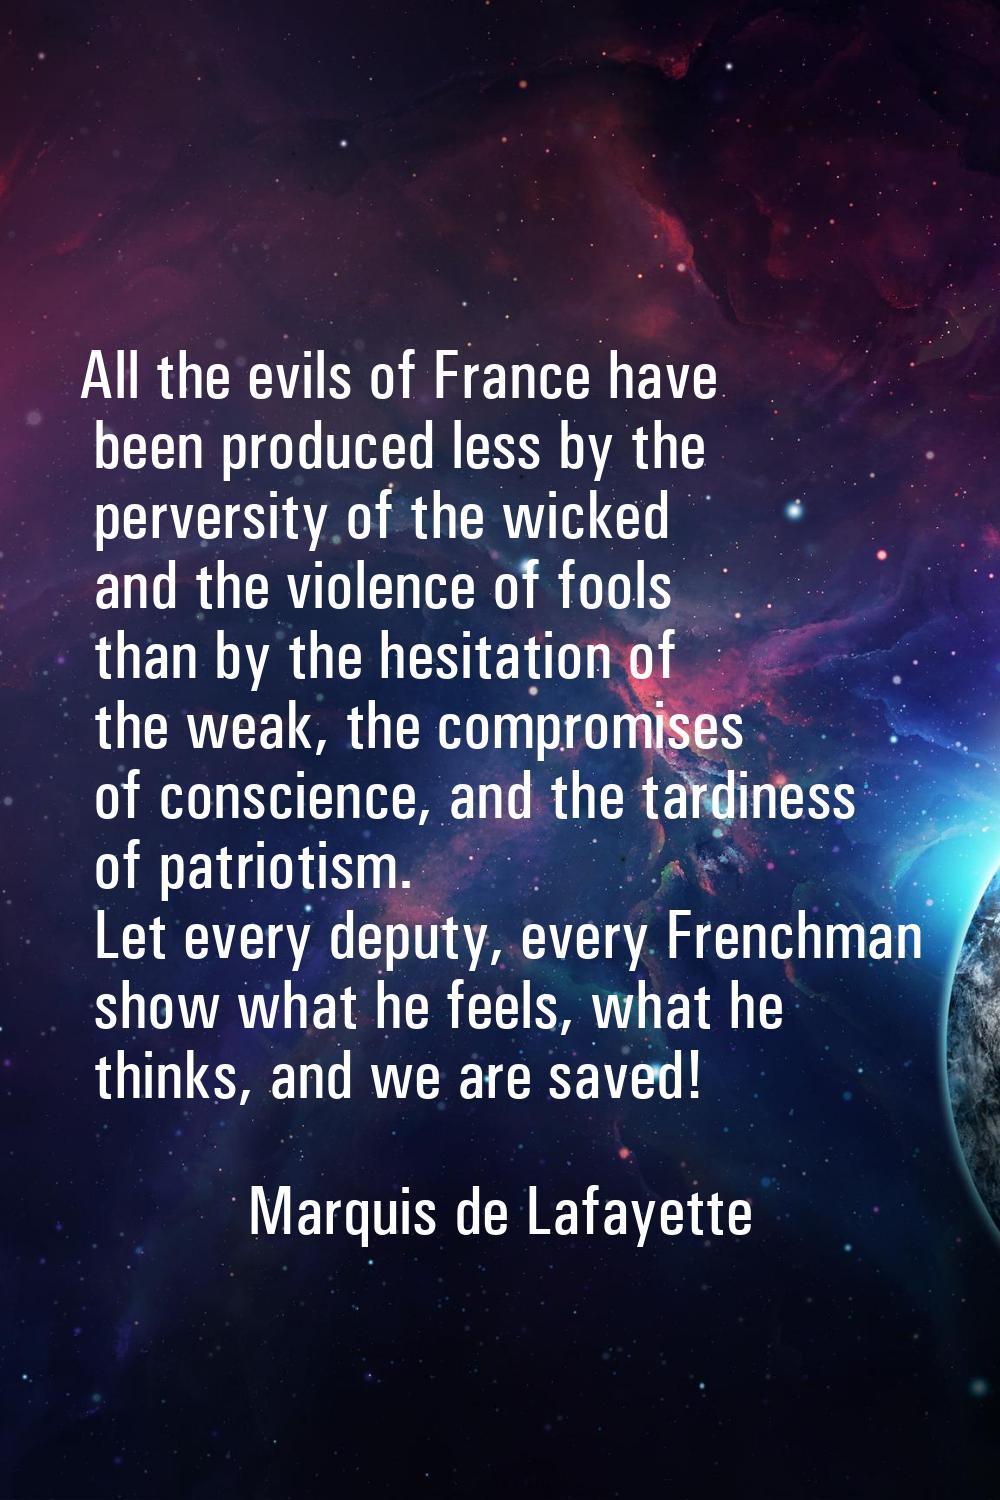 All the evils of France have been produced less by the perversity of the wicked and the violence of